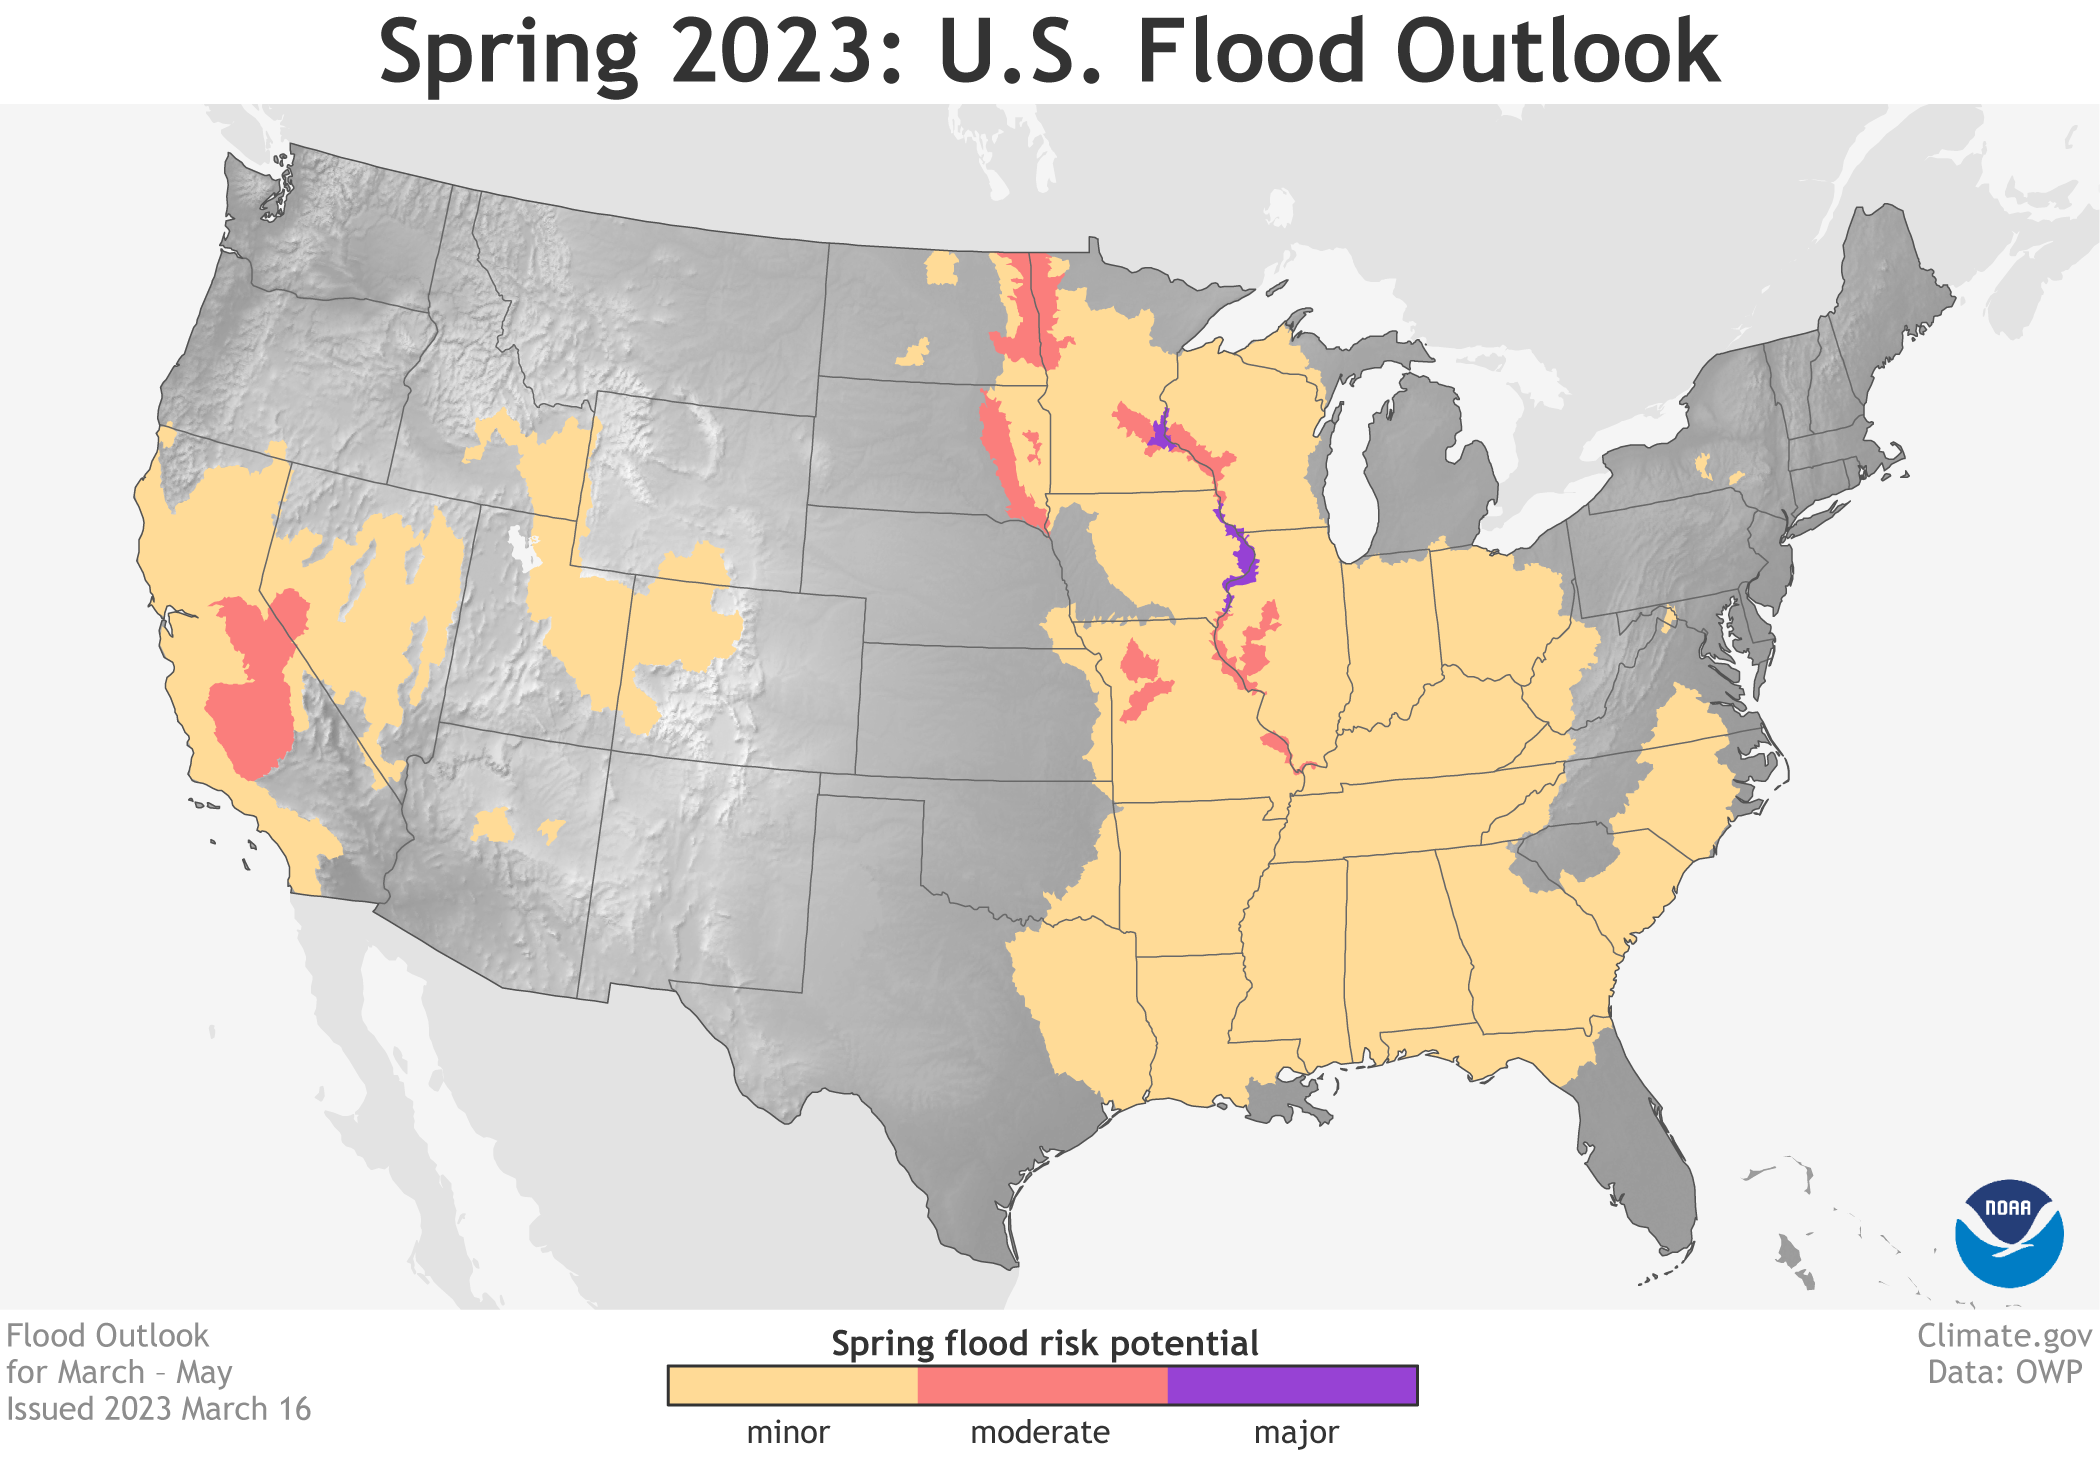 This map depicts the locations where there is a greater than 50% chance of minor to major flooding during March through May, 2023.